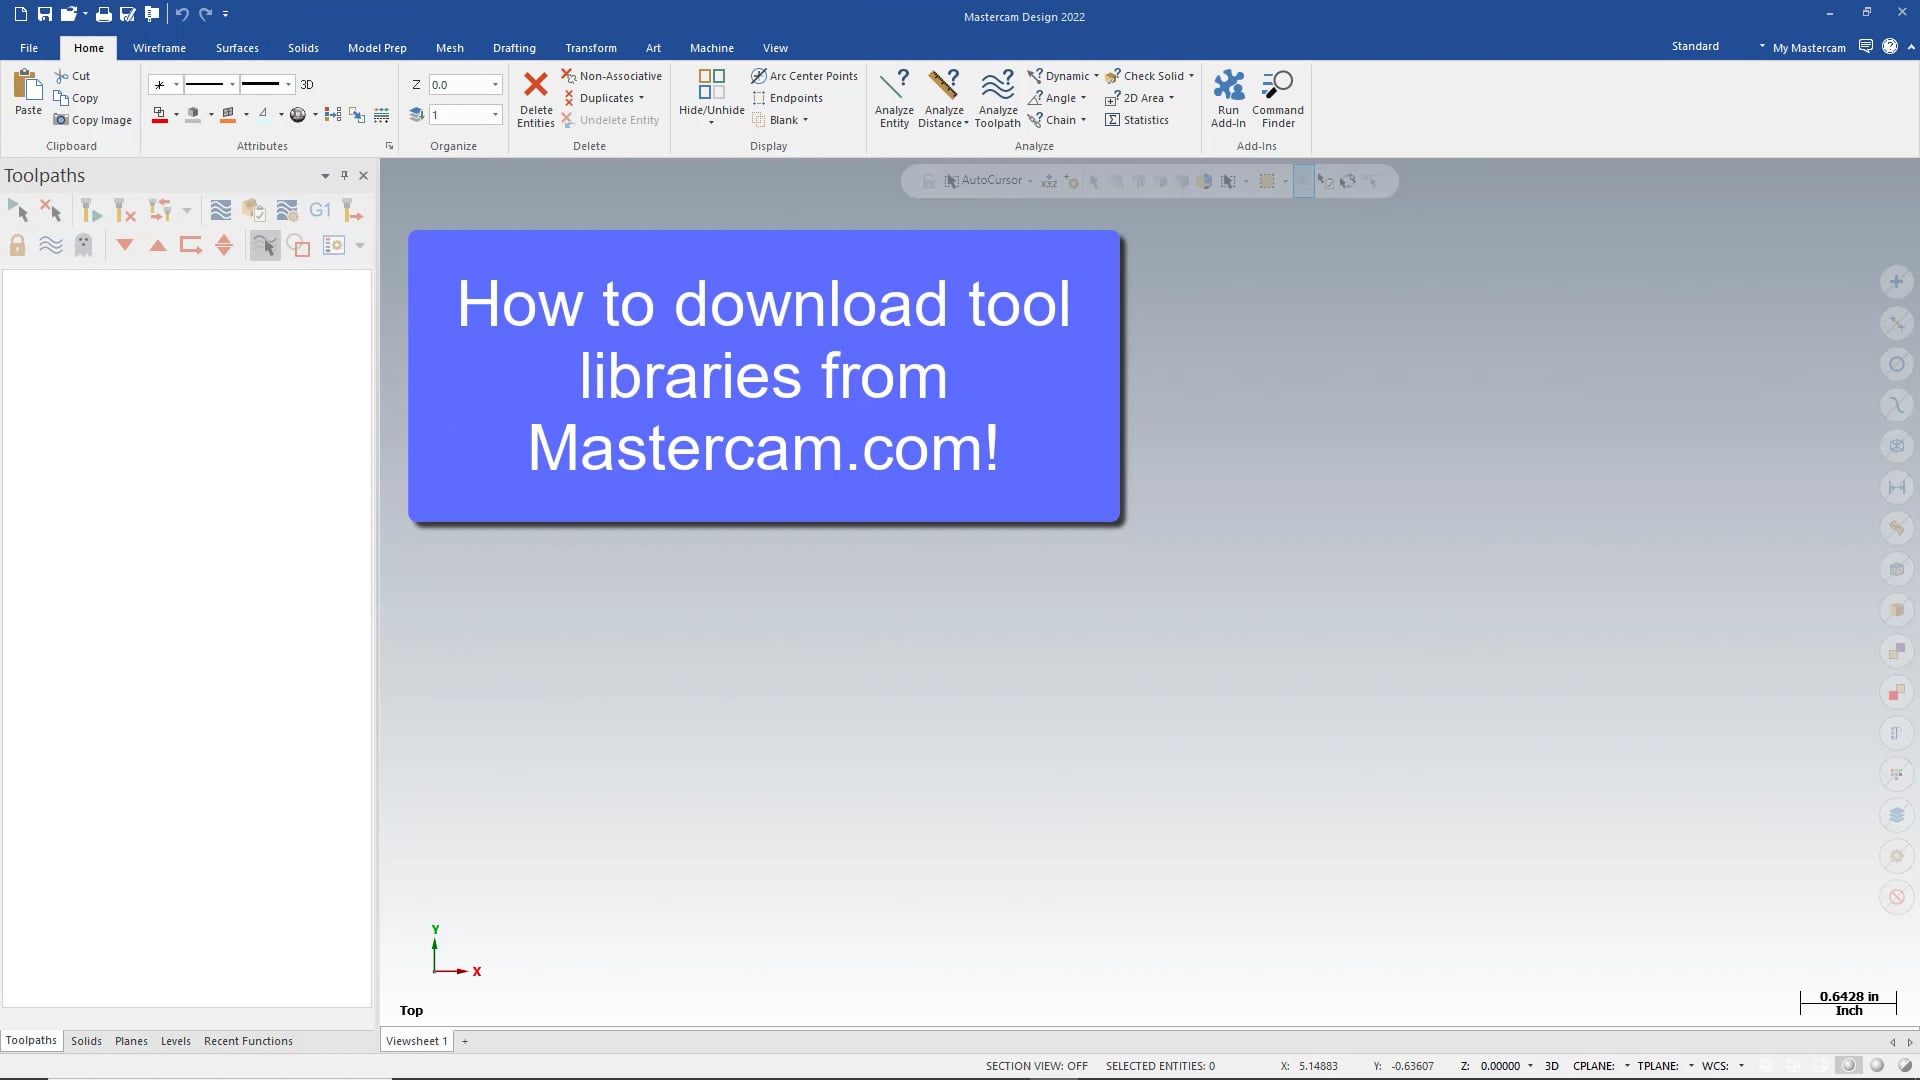 How to download tool libraries from Mastercam.com